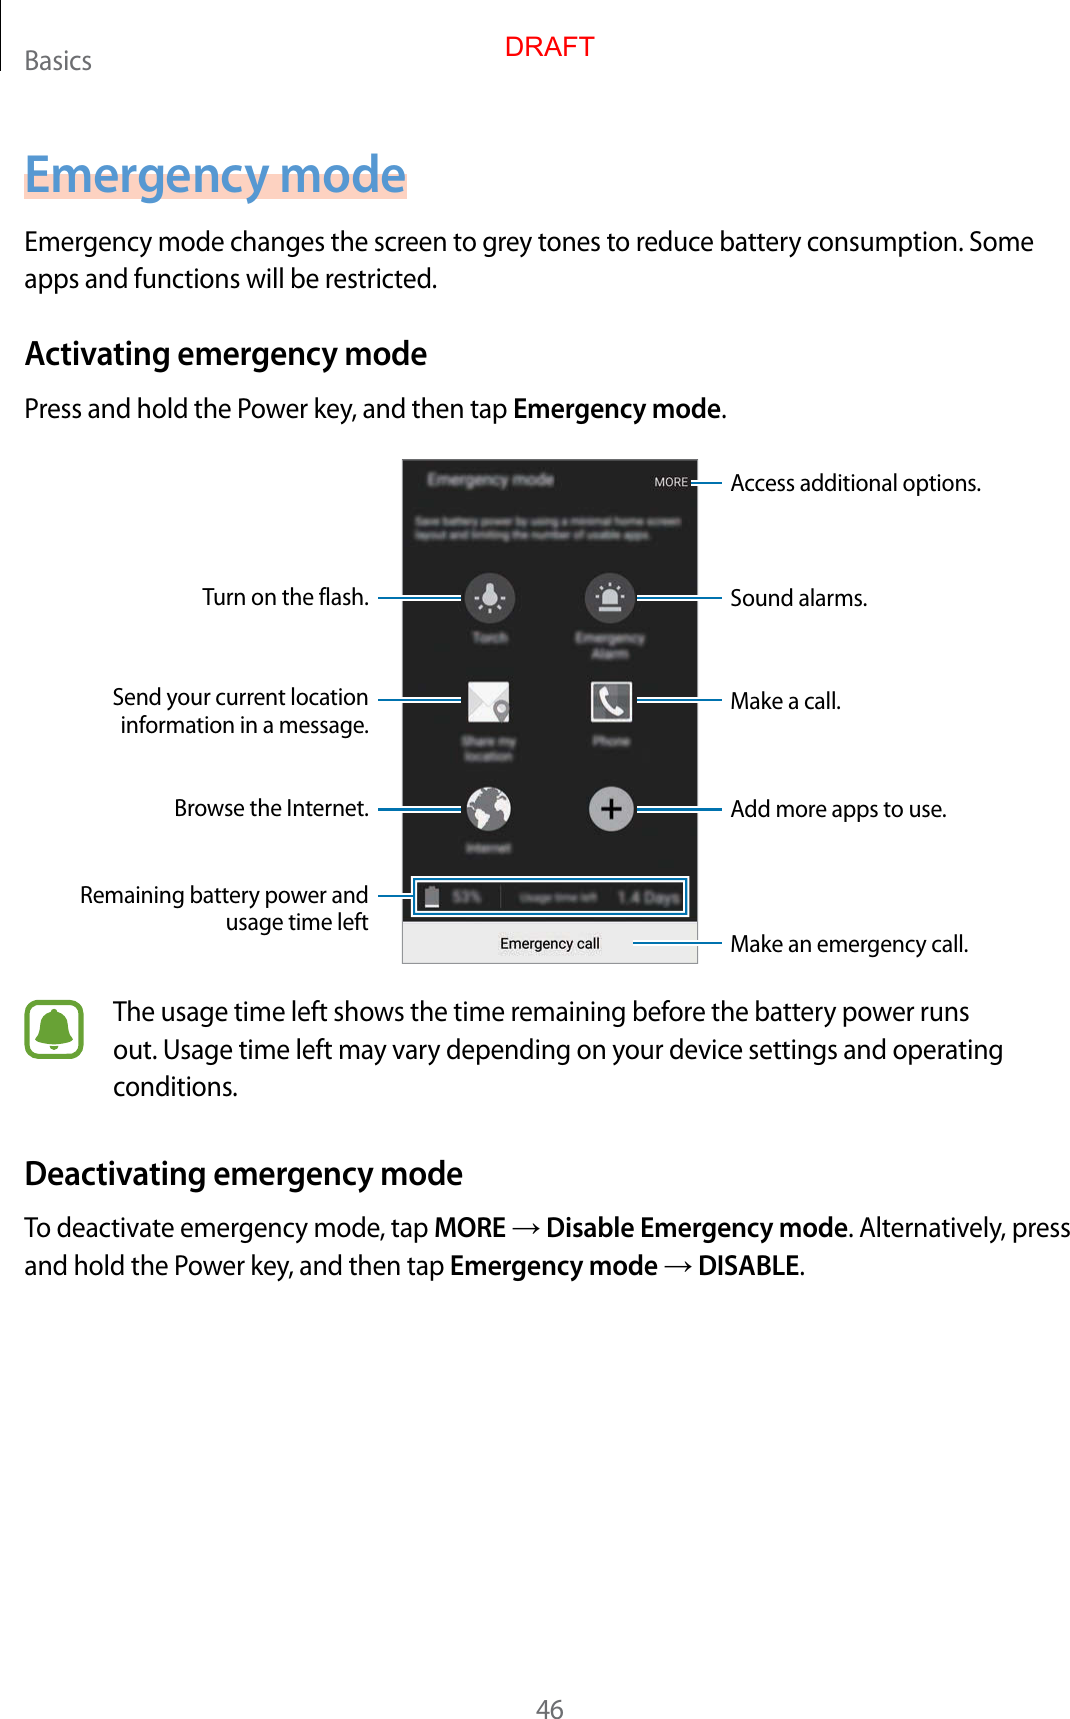 Basics46Emergency modeEmergency mode changes the screen to gr ey t ones to r educ e batt ery consumption. Some apps and functions will be restricted .Activating emer gency modePr ess and hold the Pow er key, and then tap Emergency mode.Add mor e apps to use .Make an emergency call.Remaining battery power and usage time leftTurn on the flash.Make a call.Send your current location information in a message .Brow se the Internet.Acc ess additional options .Sound alarms.The usage time left shows the time r emaining bef or e the batt ery power runs out. Usage time left may vary depending on your device settings and operating conditions.Deactiva ting emer gency modeTo deactivate emergency mode, tap MORE → Disable Emergency mode. Alternativ ely, pr ess and hold the P o w er key, and then tap Emergency mode → DISABLE.DRAFT